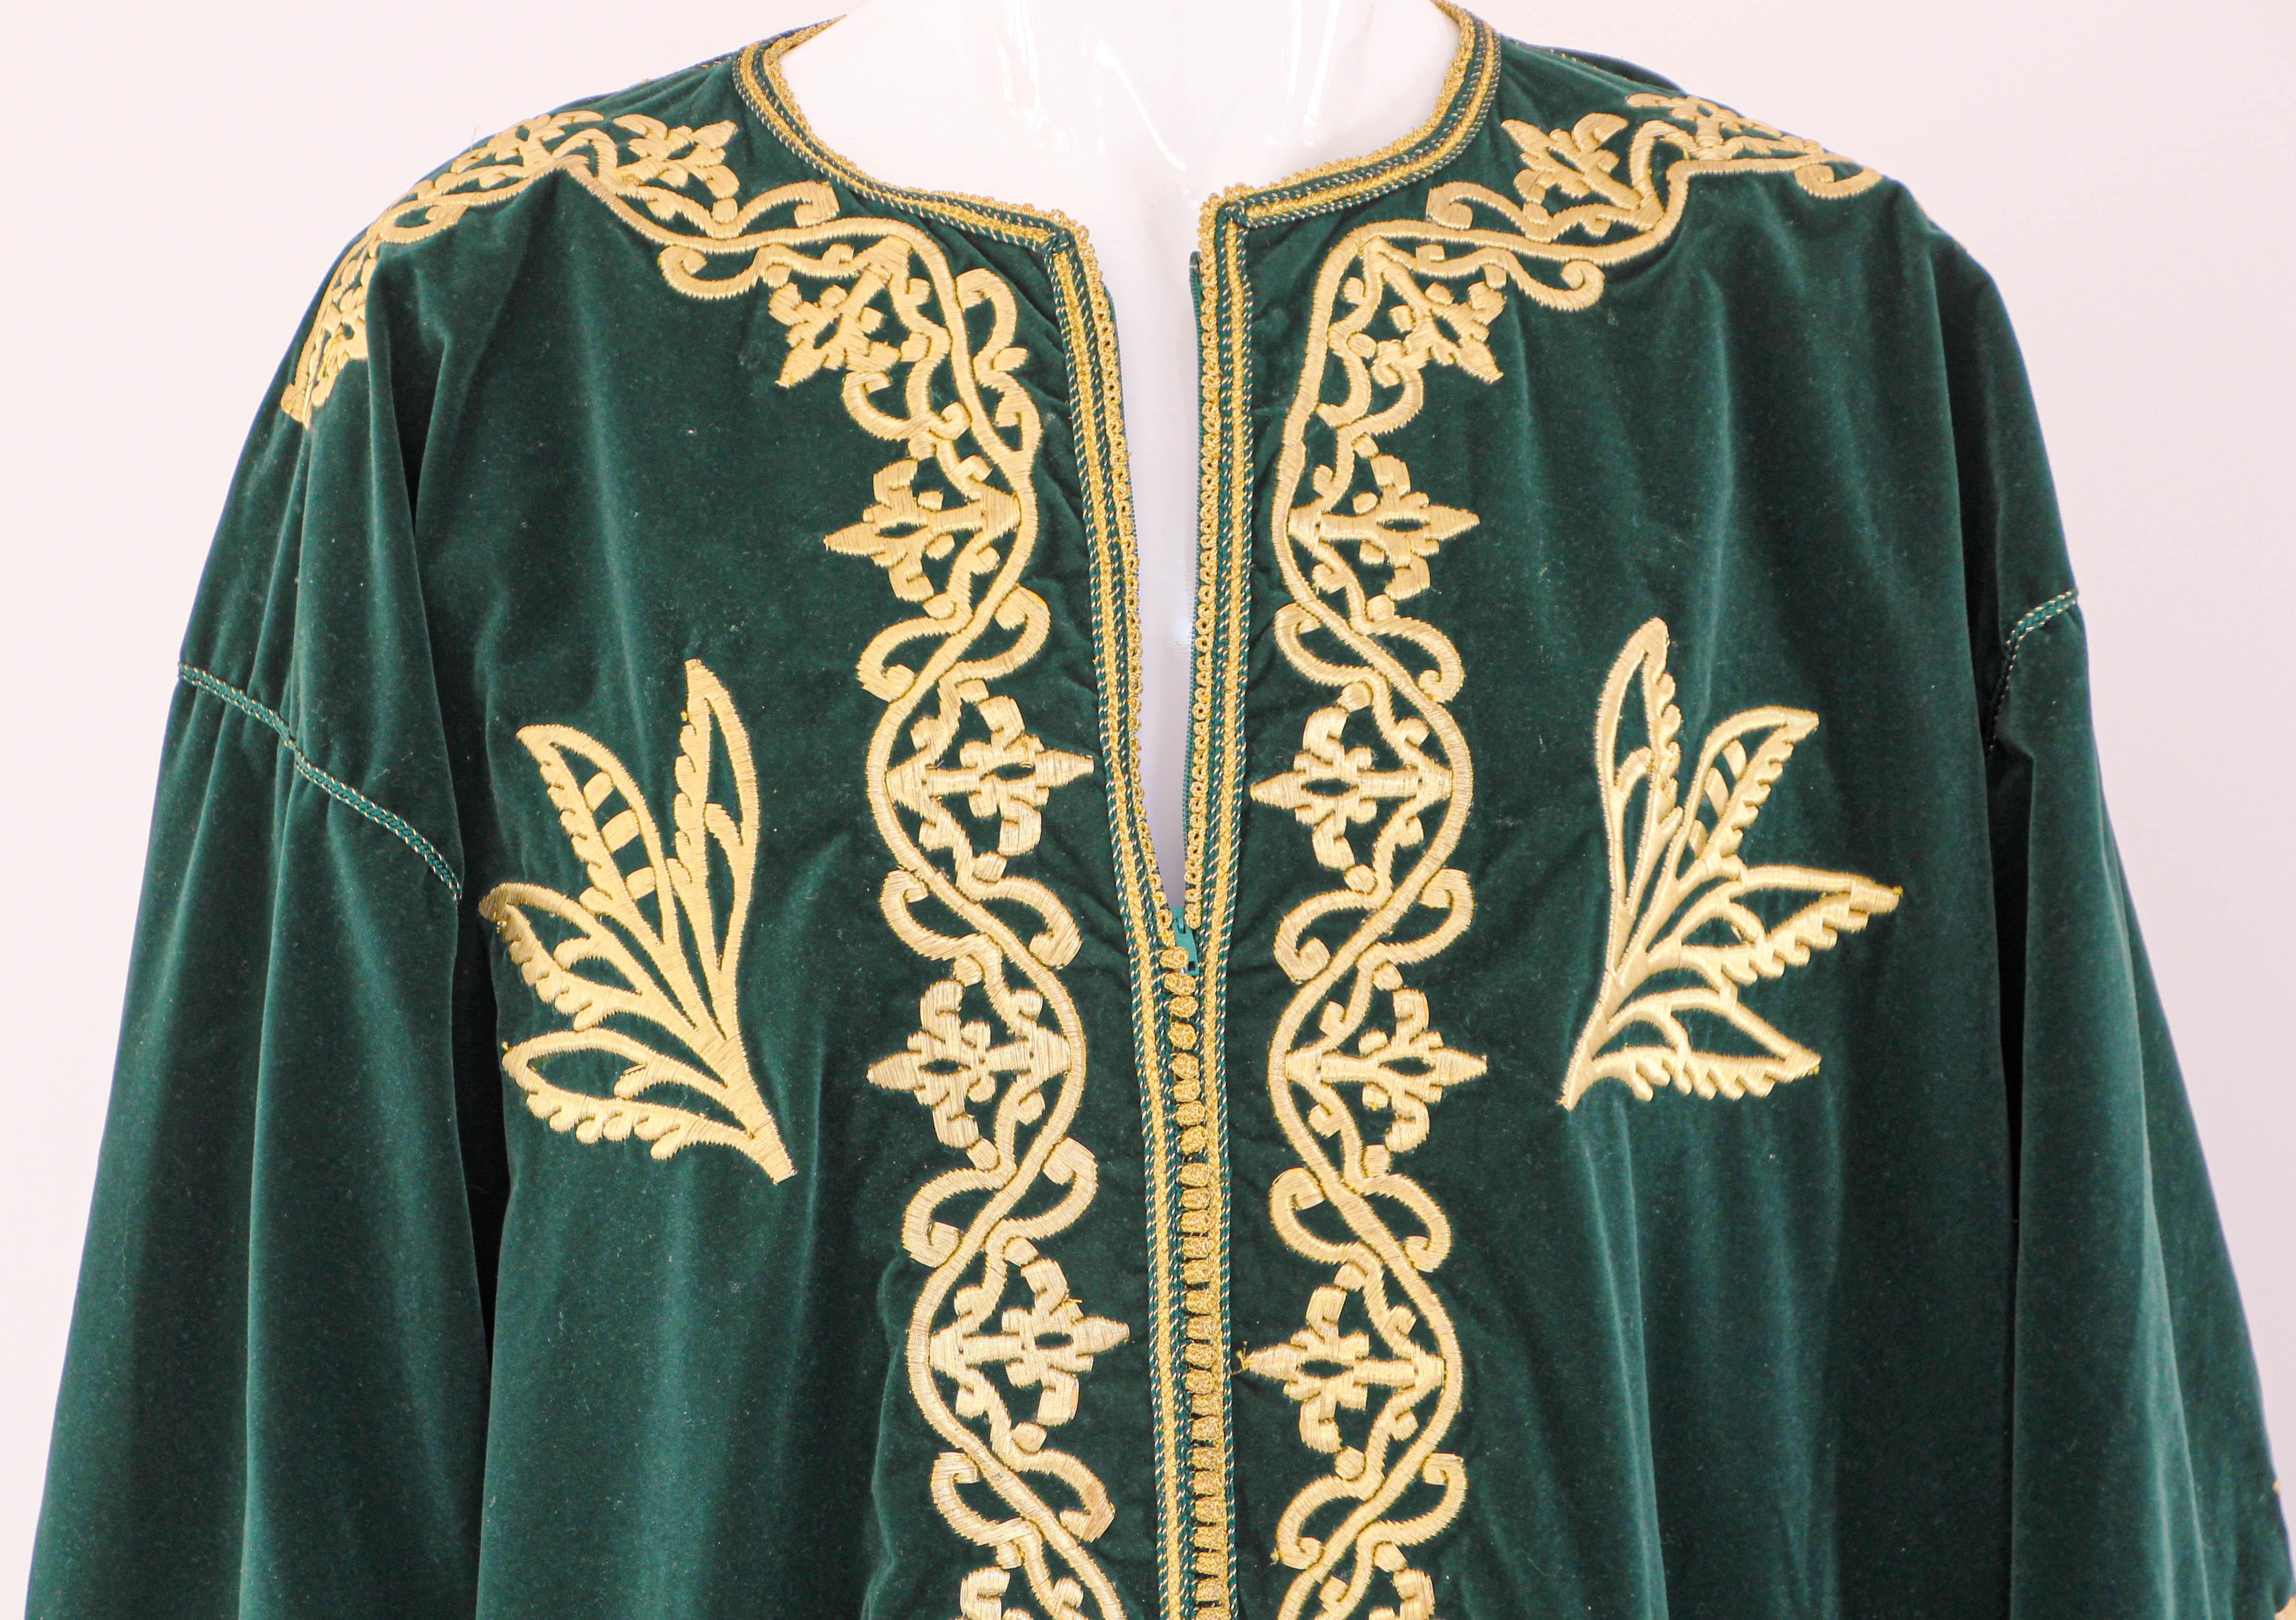 Women's or Men's 1960s Vintage Moroccan Velvet Caftan Emerald Green and Gold Thread For Sale